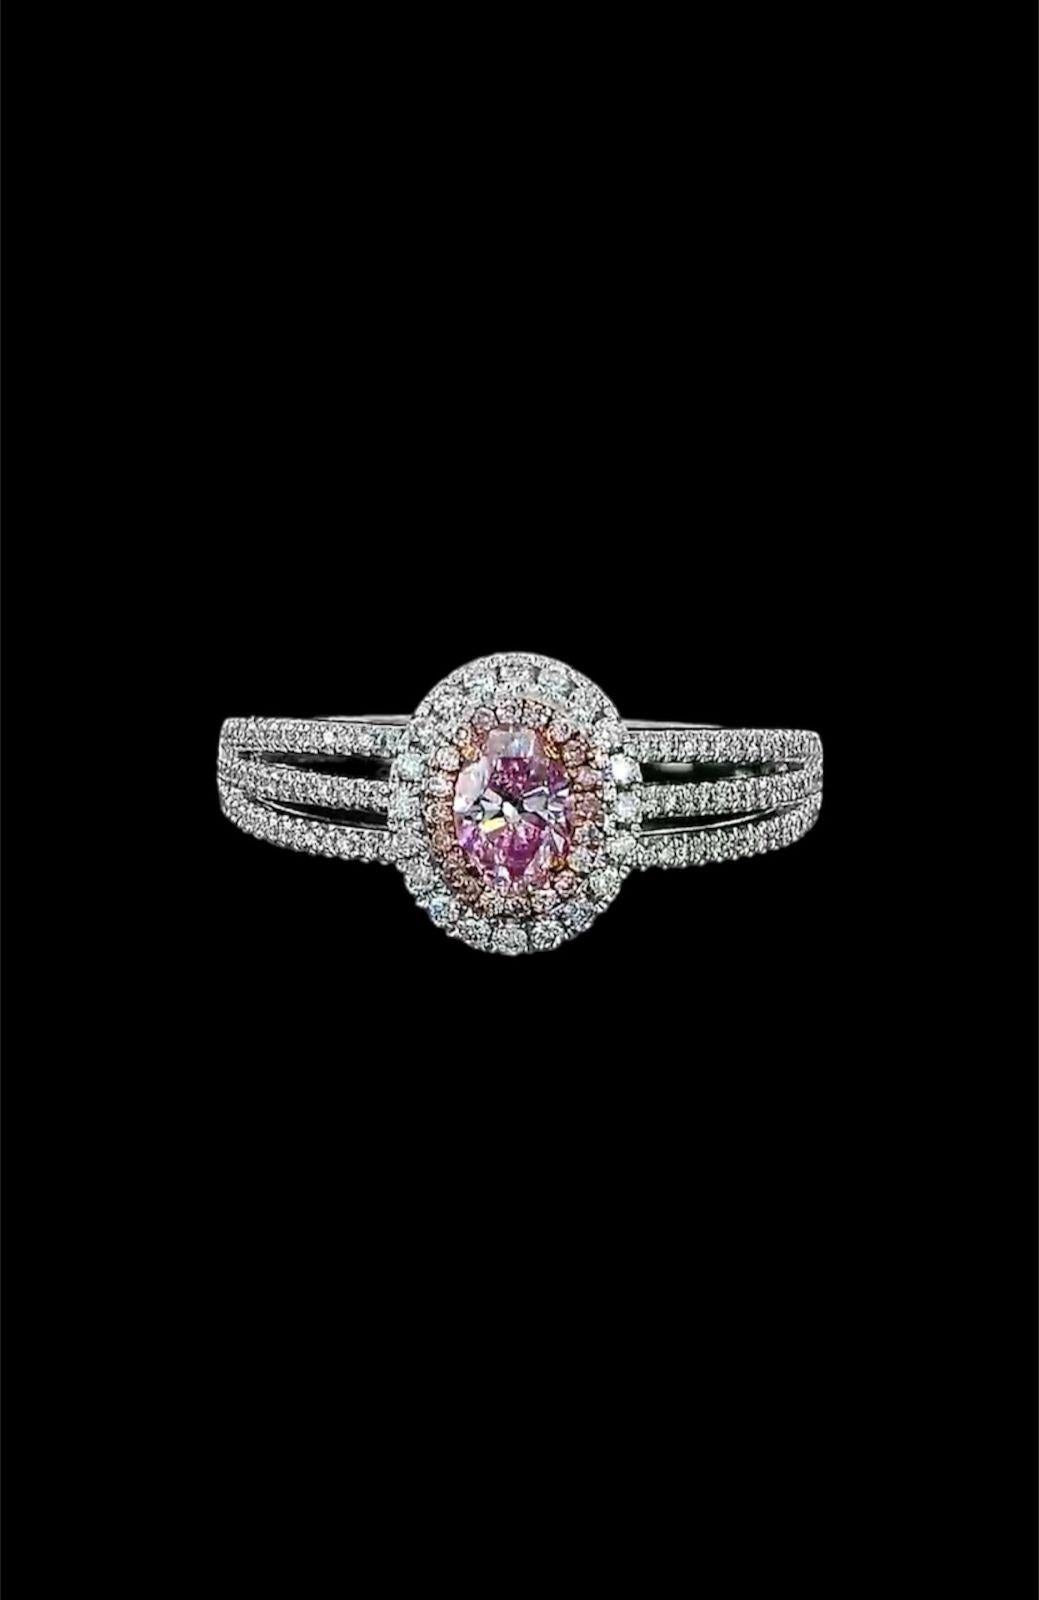 GIA Certified 0.33 Carat Faint Pink Diamond Ring VS2 Clarity For Sale 6